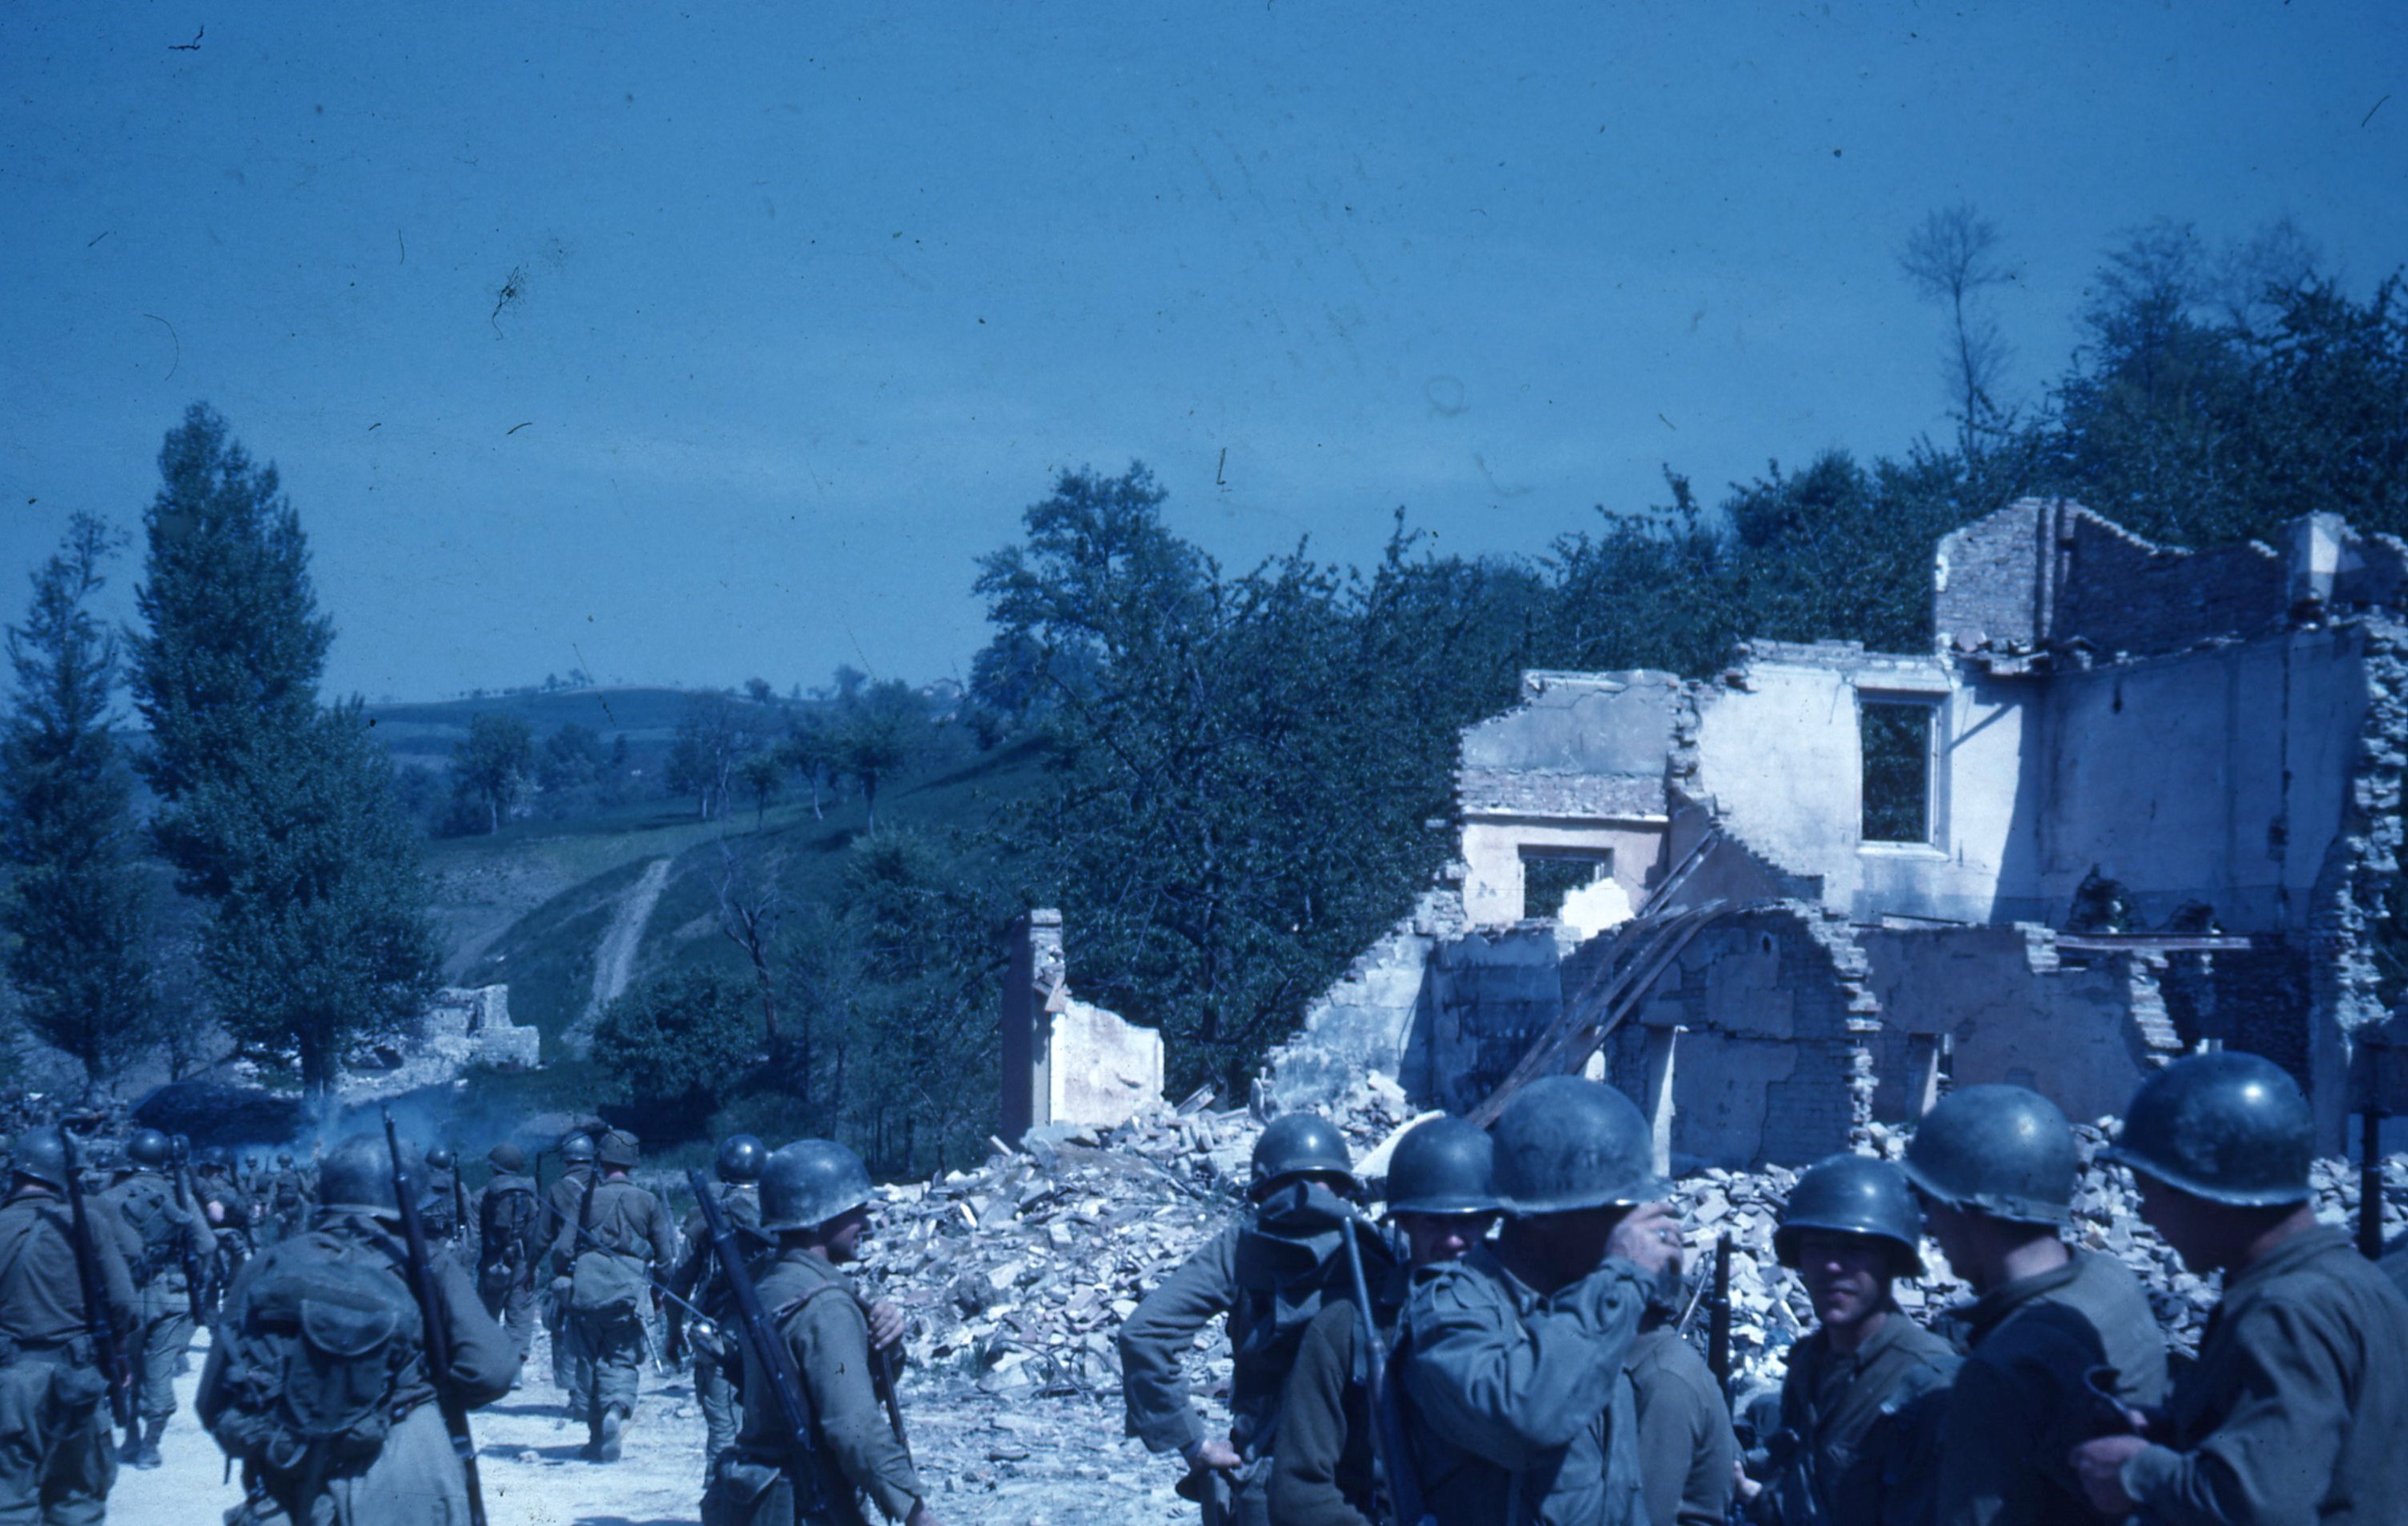 10th Mountain Division soldiers on the march in Italy